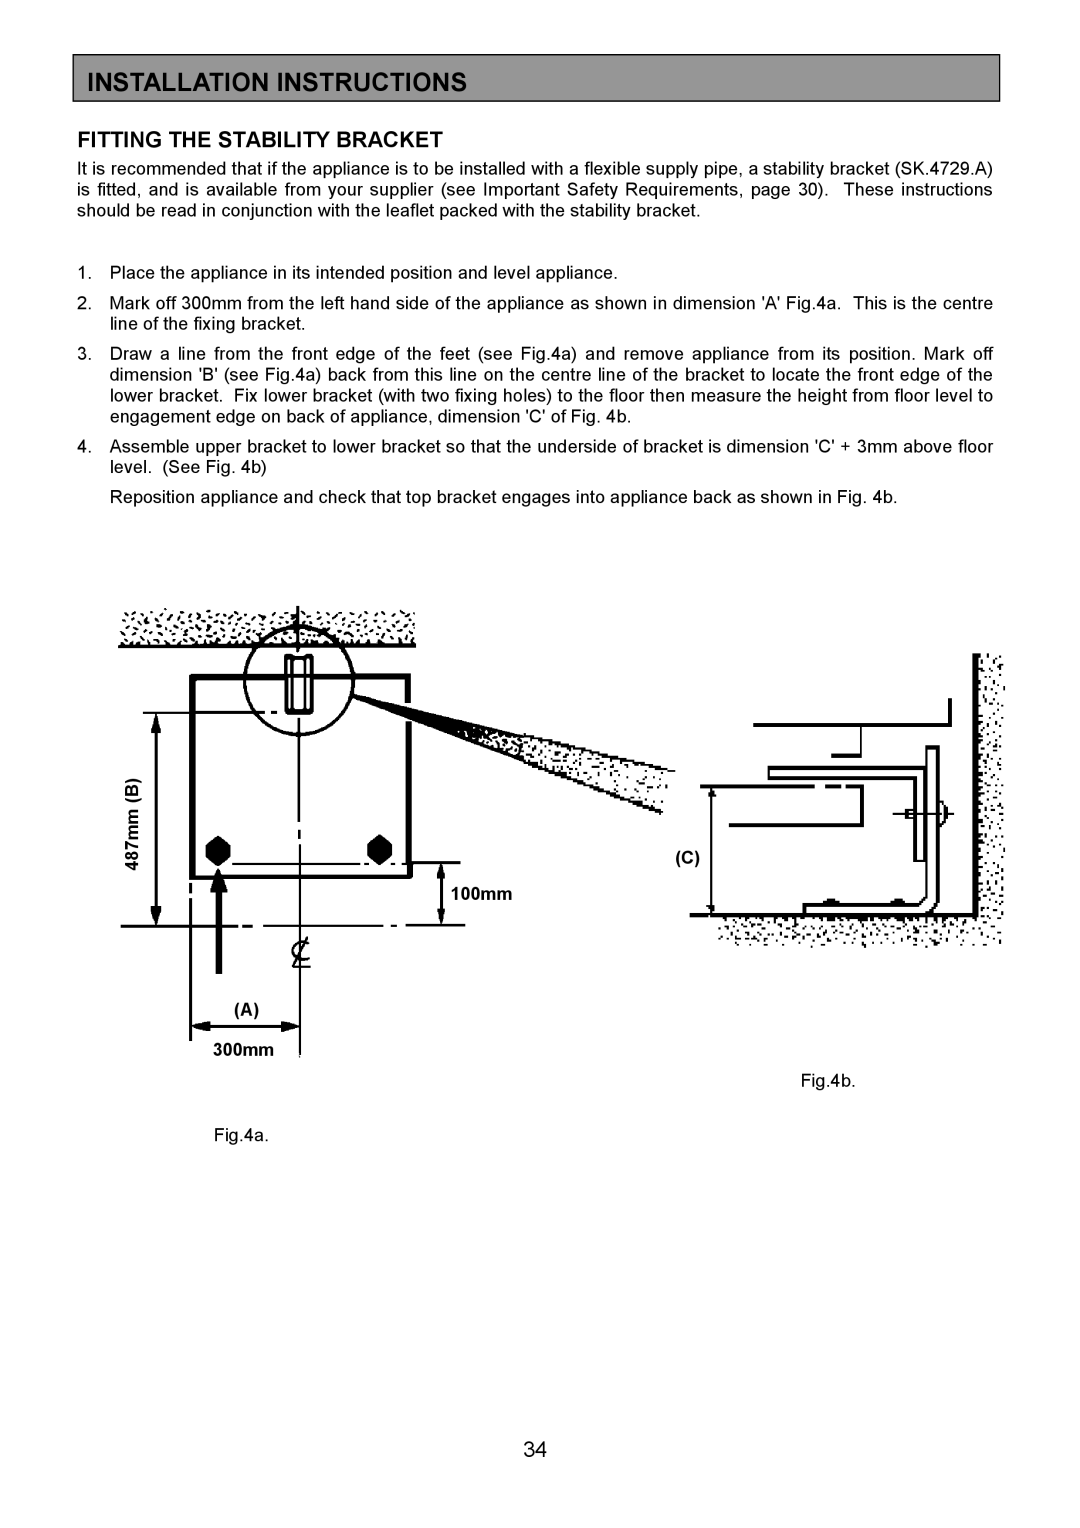 Electrolux SM 554 installation instructions Fitting the Stability Bracket 